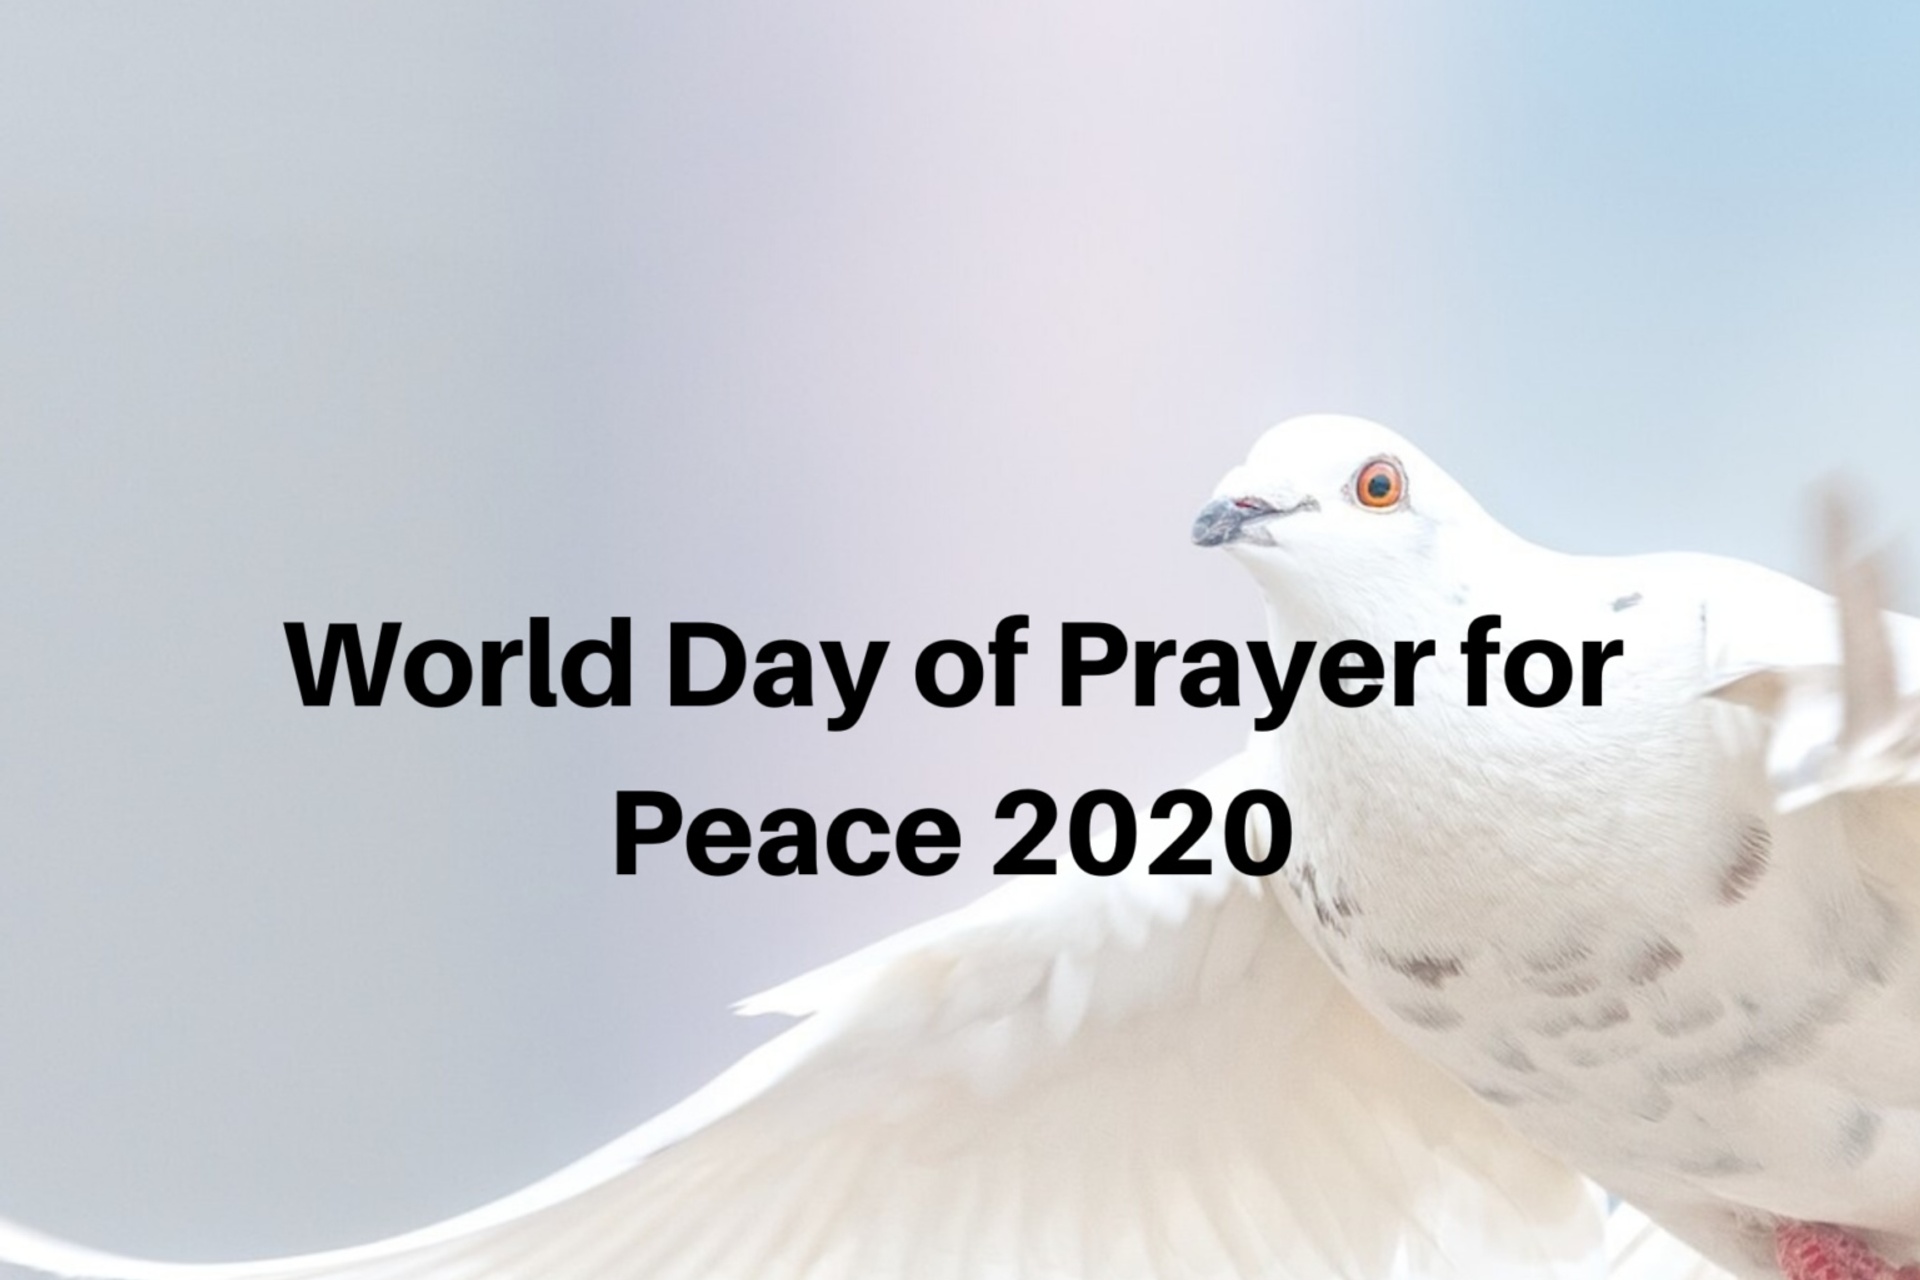 World Day of Prayer for Peace 2020